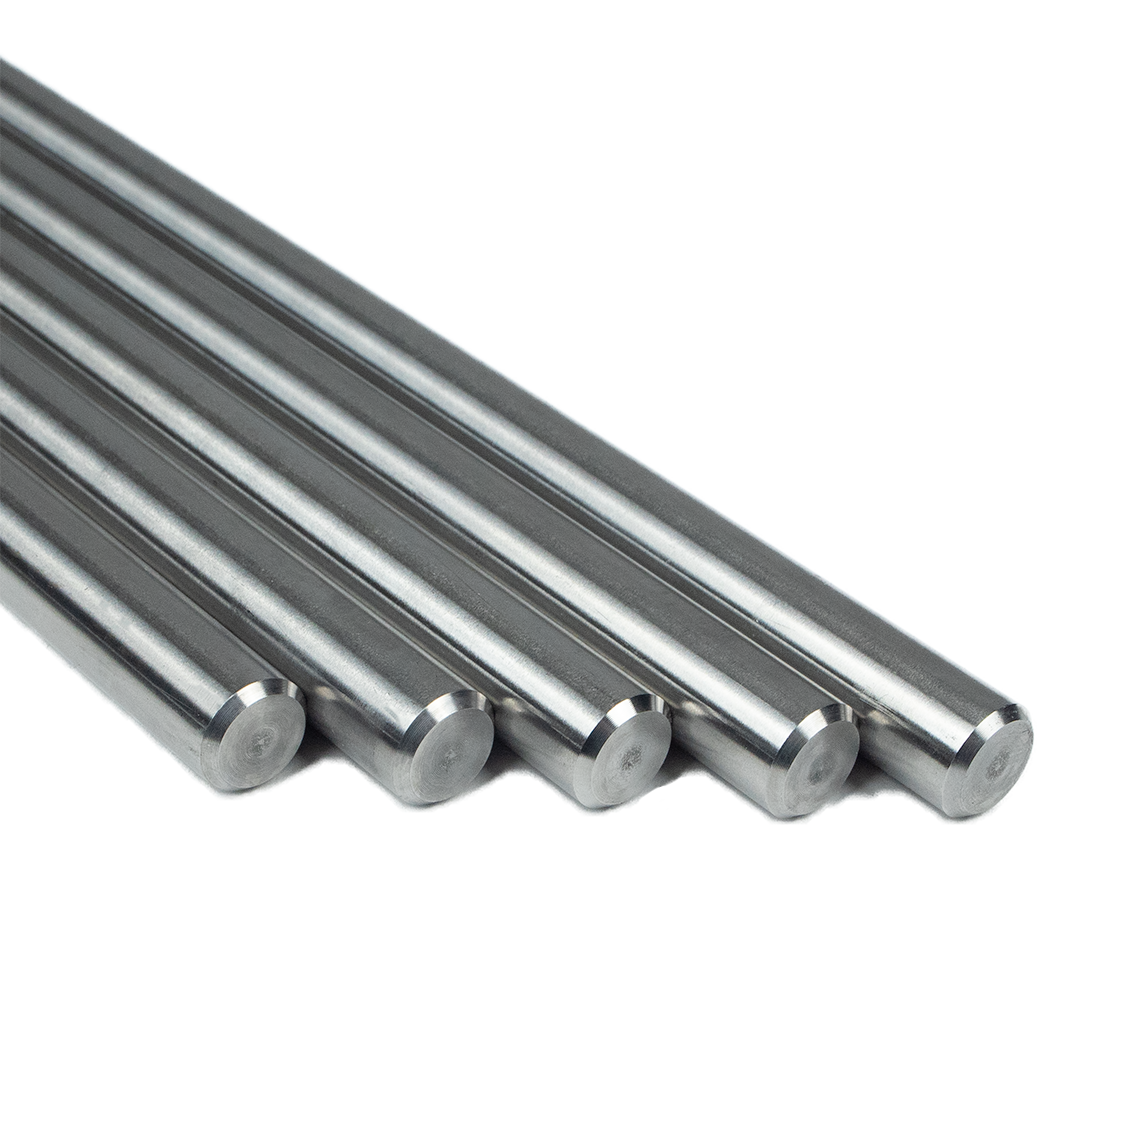 Stand Rod - Ø 12 mm, length 1000 mm - stainless steel